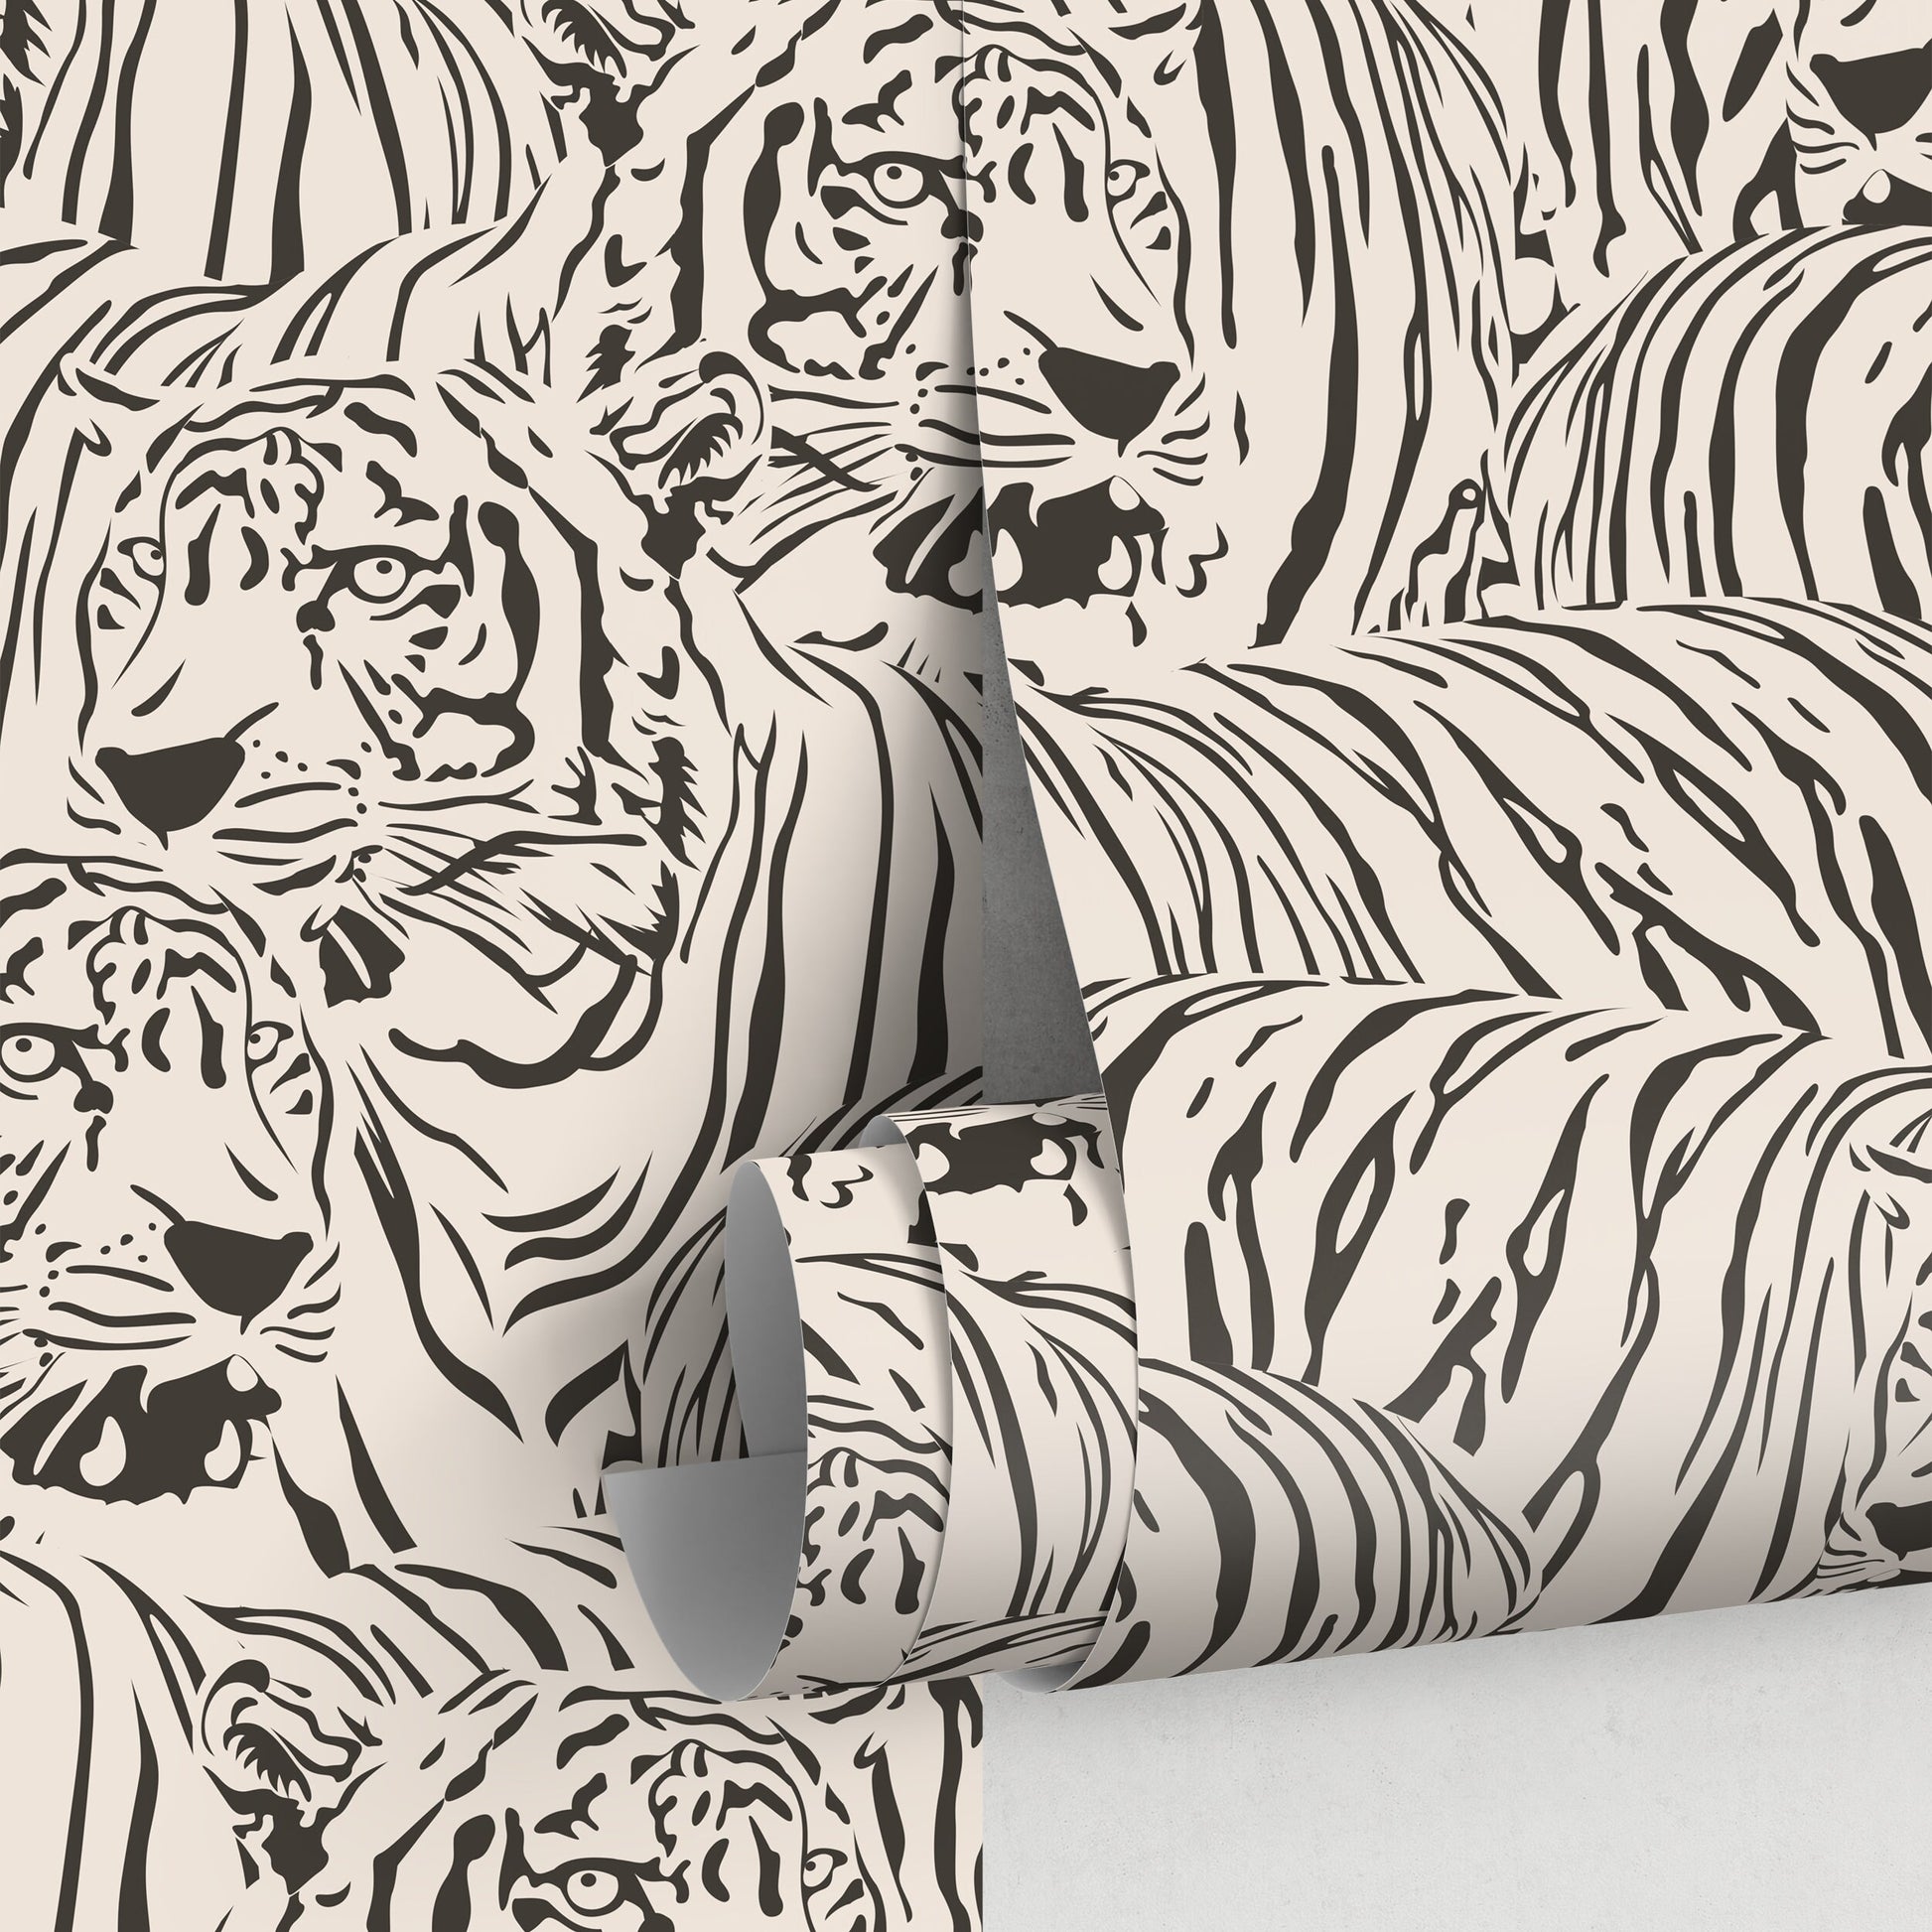 Neutral Boho Tiger Wallpaper Removable Peel and Stick Wallpaper, Animal Print Repositionable Peel and Stick Wallpaper - ZADZ